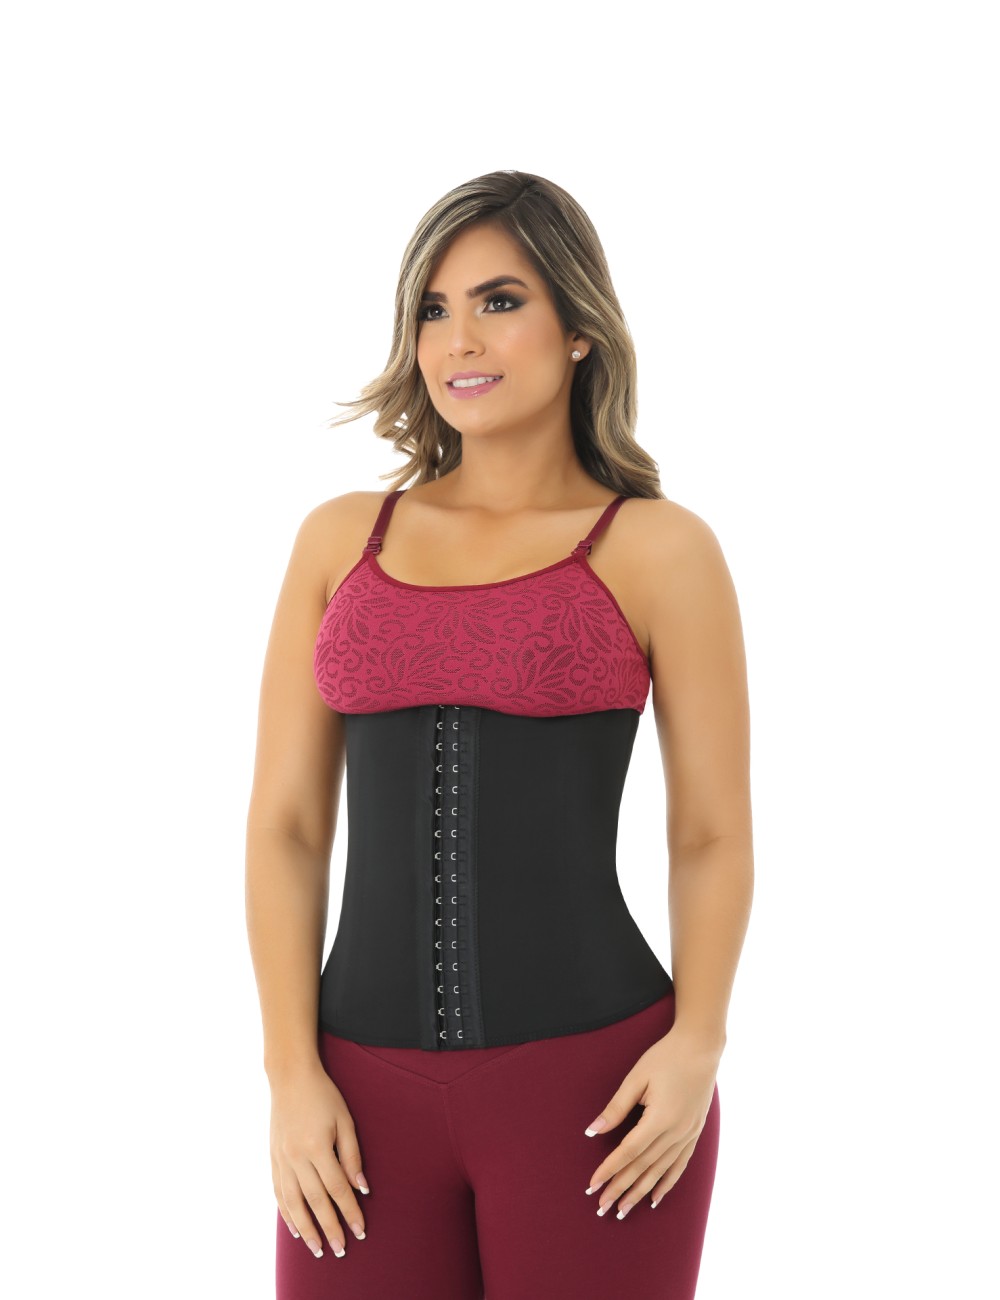 Medium to High Compression Shapewear Corsets great for posture at